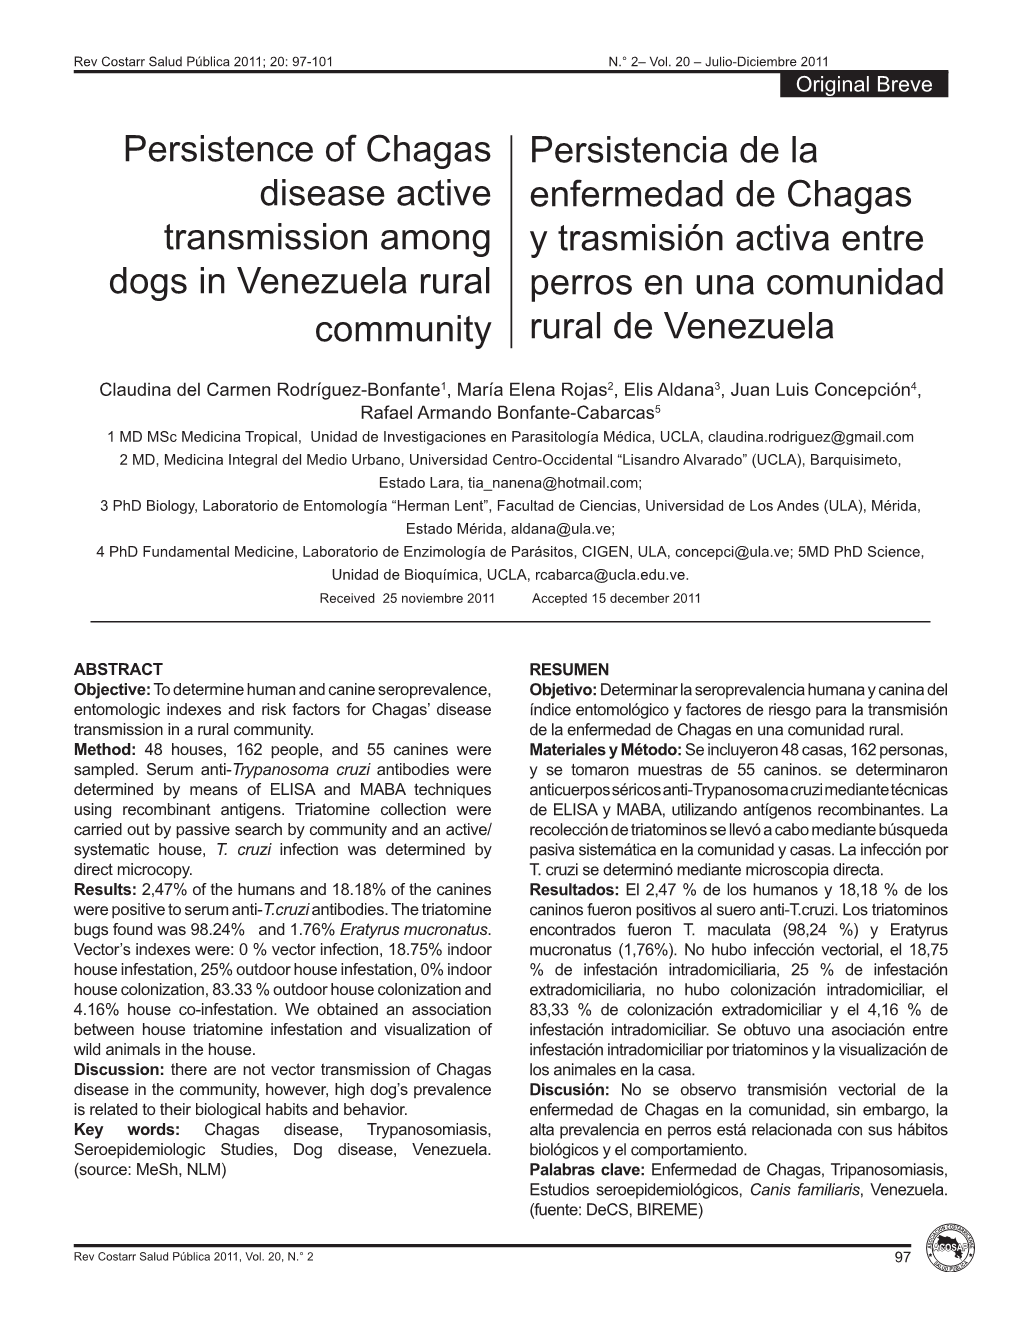 Persistence of Chagas Disease Active Transmission Among Dogs in Venezuela Rural Community